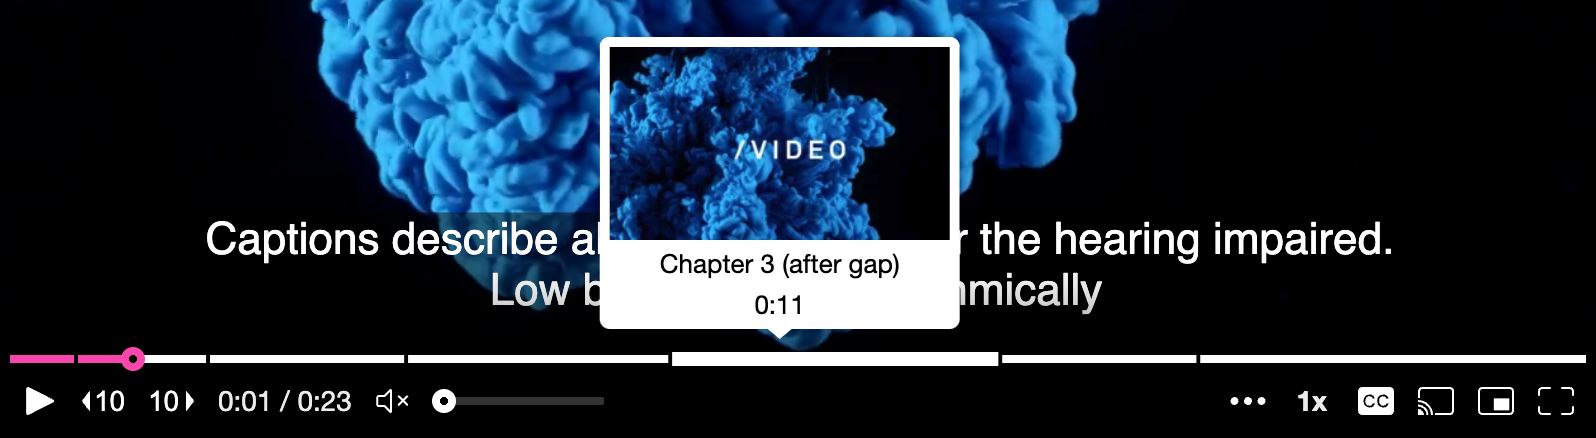 Mux Player chapter example with a gap between chapters